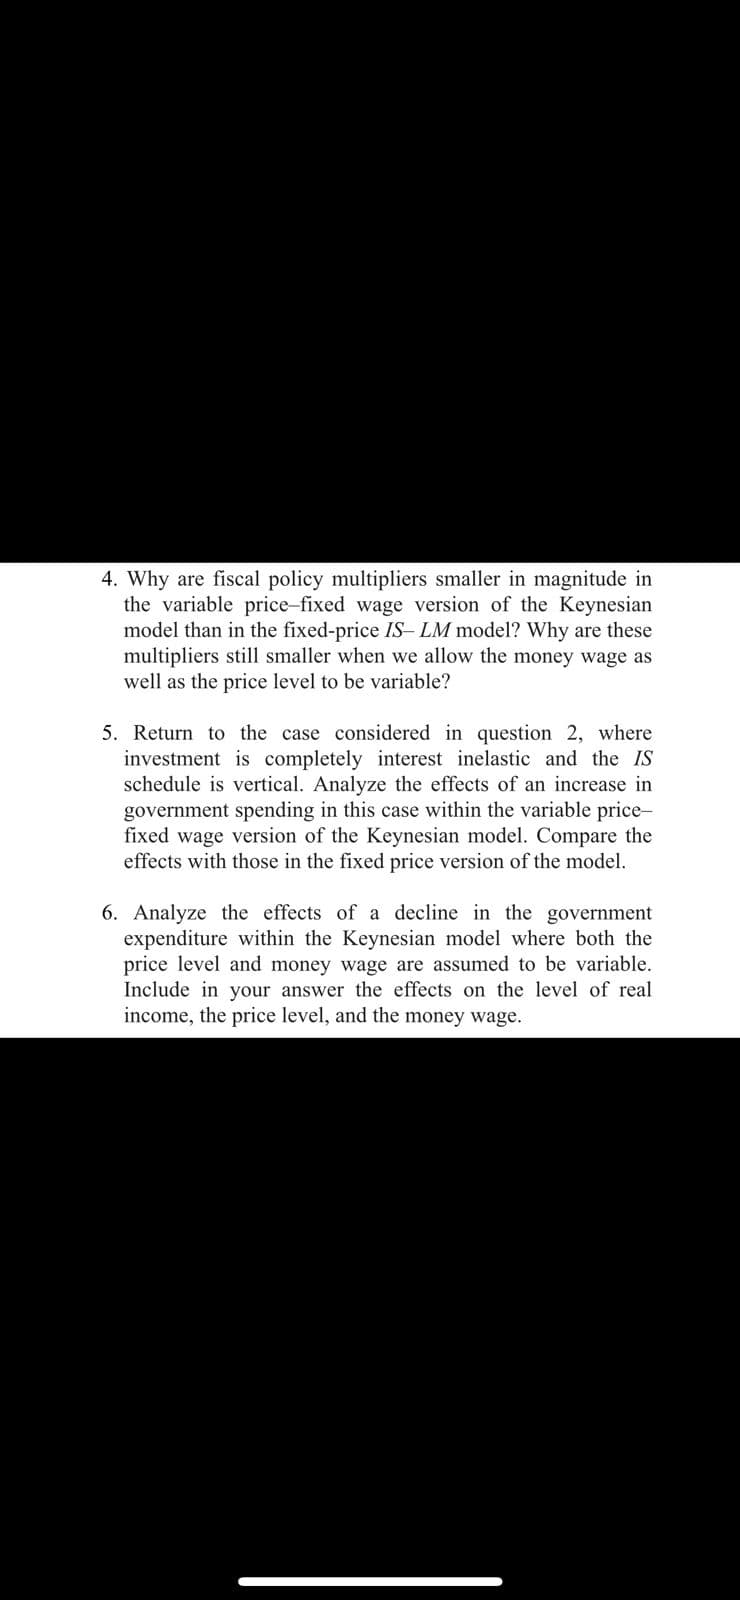 4. Why are fiscal policy multipliers smaller in magnitude in
the variable price-fixed wage version of the Keynesian
model than in the fixed-price IS- LM model? Why are these
multipliers still smaller when we allow the money wage as
well as the price level to be variable?
5. Return to the case considered in question 2, where
investment is completely interest inelastic and the IS
schedule is vertical. Analyze the effects of an increase in
government spending in this case within the variable price-
fixed wage version of the Keynesian model. Compare the
effects with those in the fixed price version of the model.
6. Analyze the effects of a decline in the government
expenditure within the Keynesian model where both the
price level and money wage are assumed to be variable.
Include in your answer the effects on the level of real
income, the price level, and the money wage.
